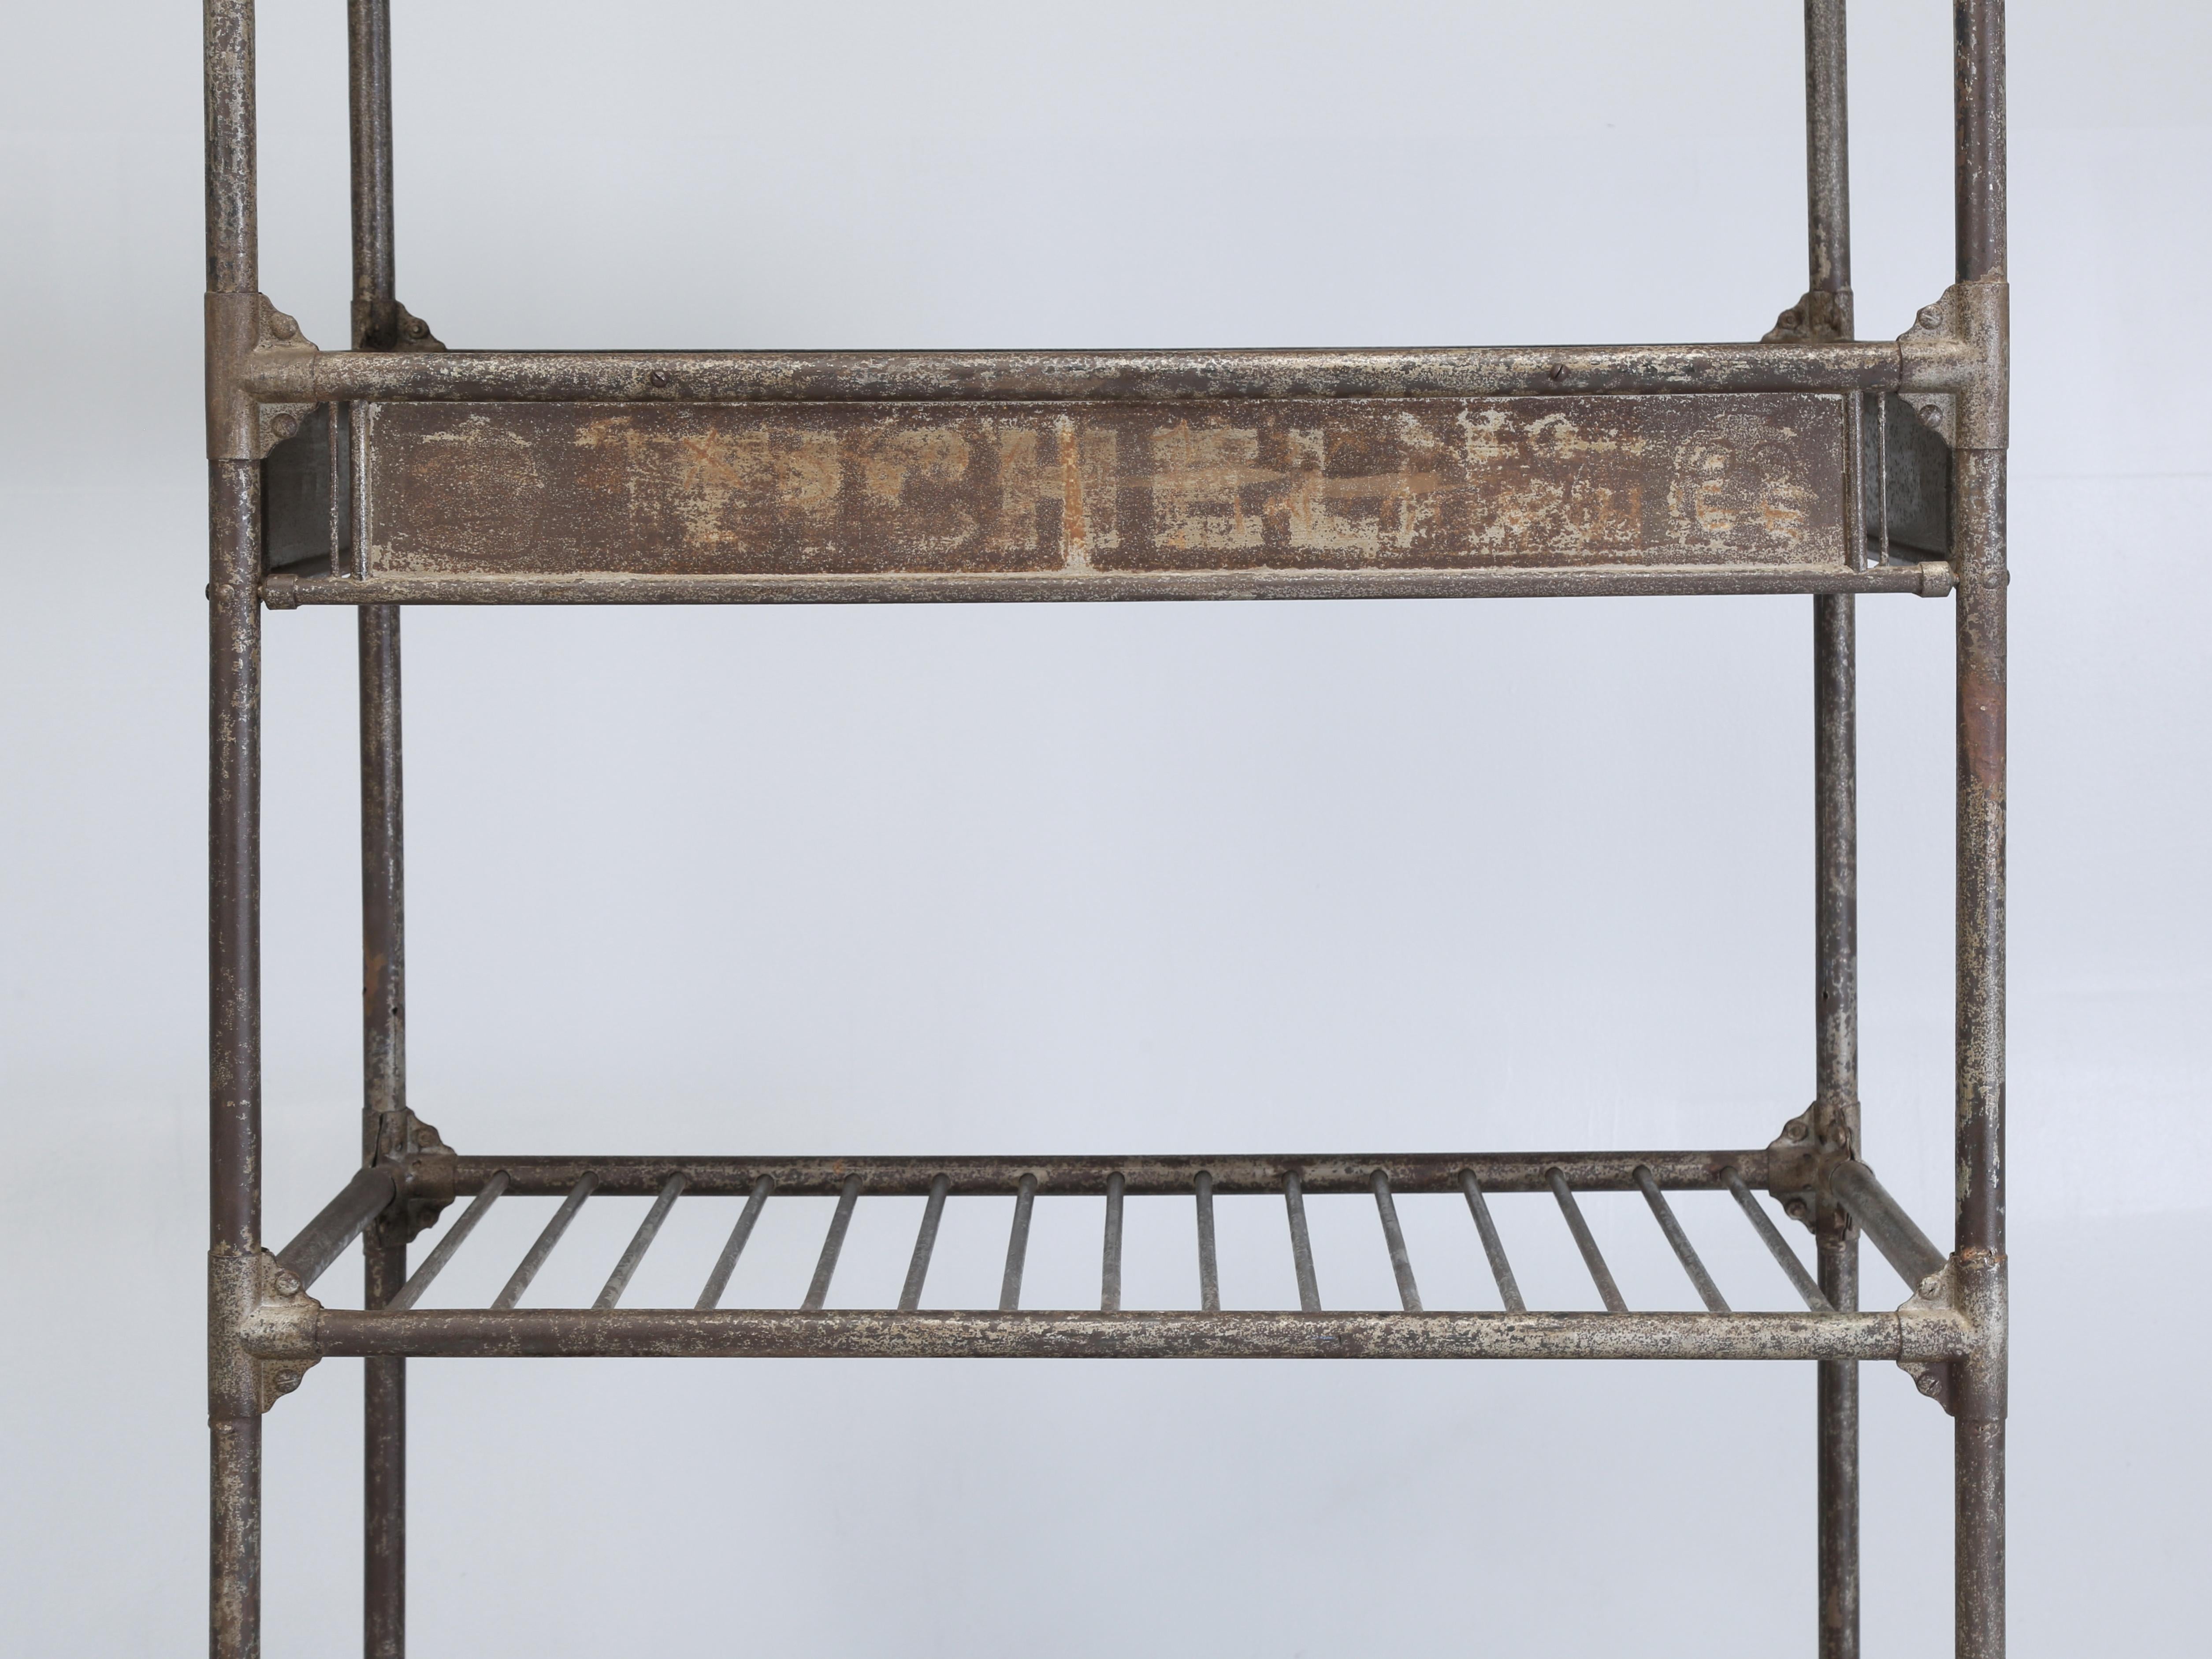 Michelin Antique French Industrial Steel Shelf Unit Made in France c1900-1920 For Sale 9